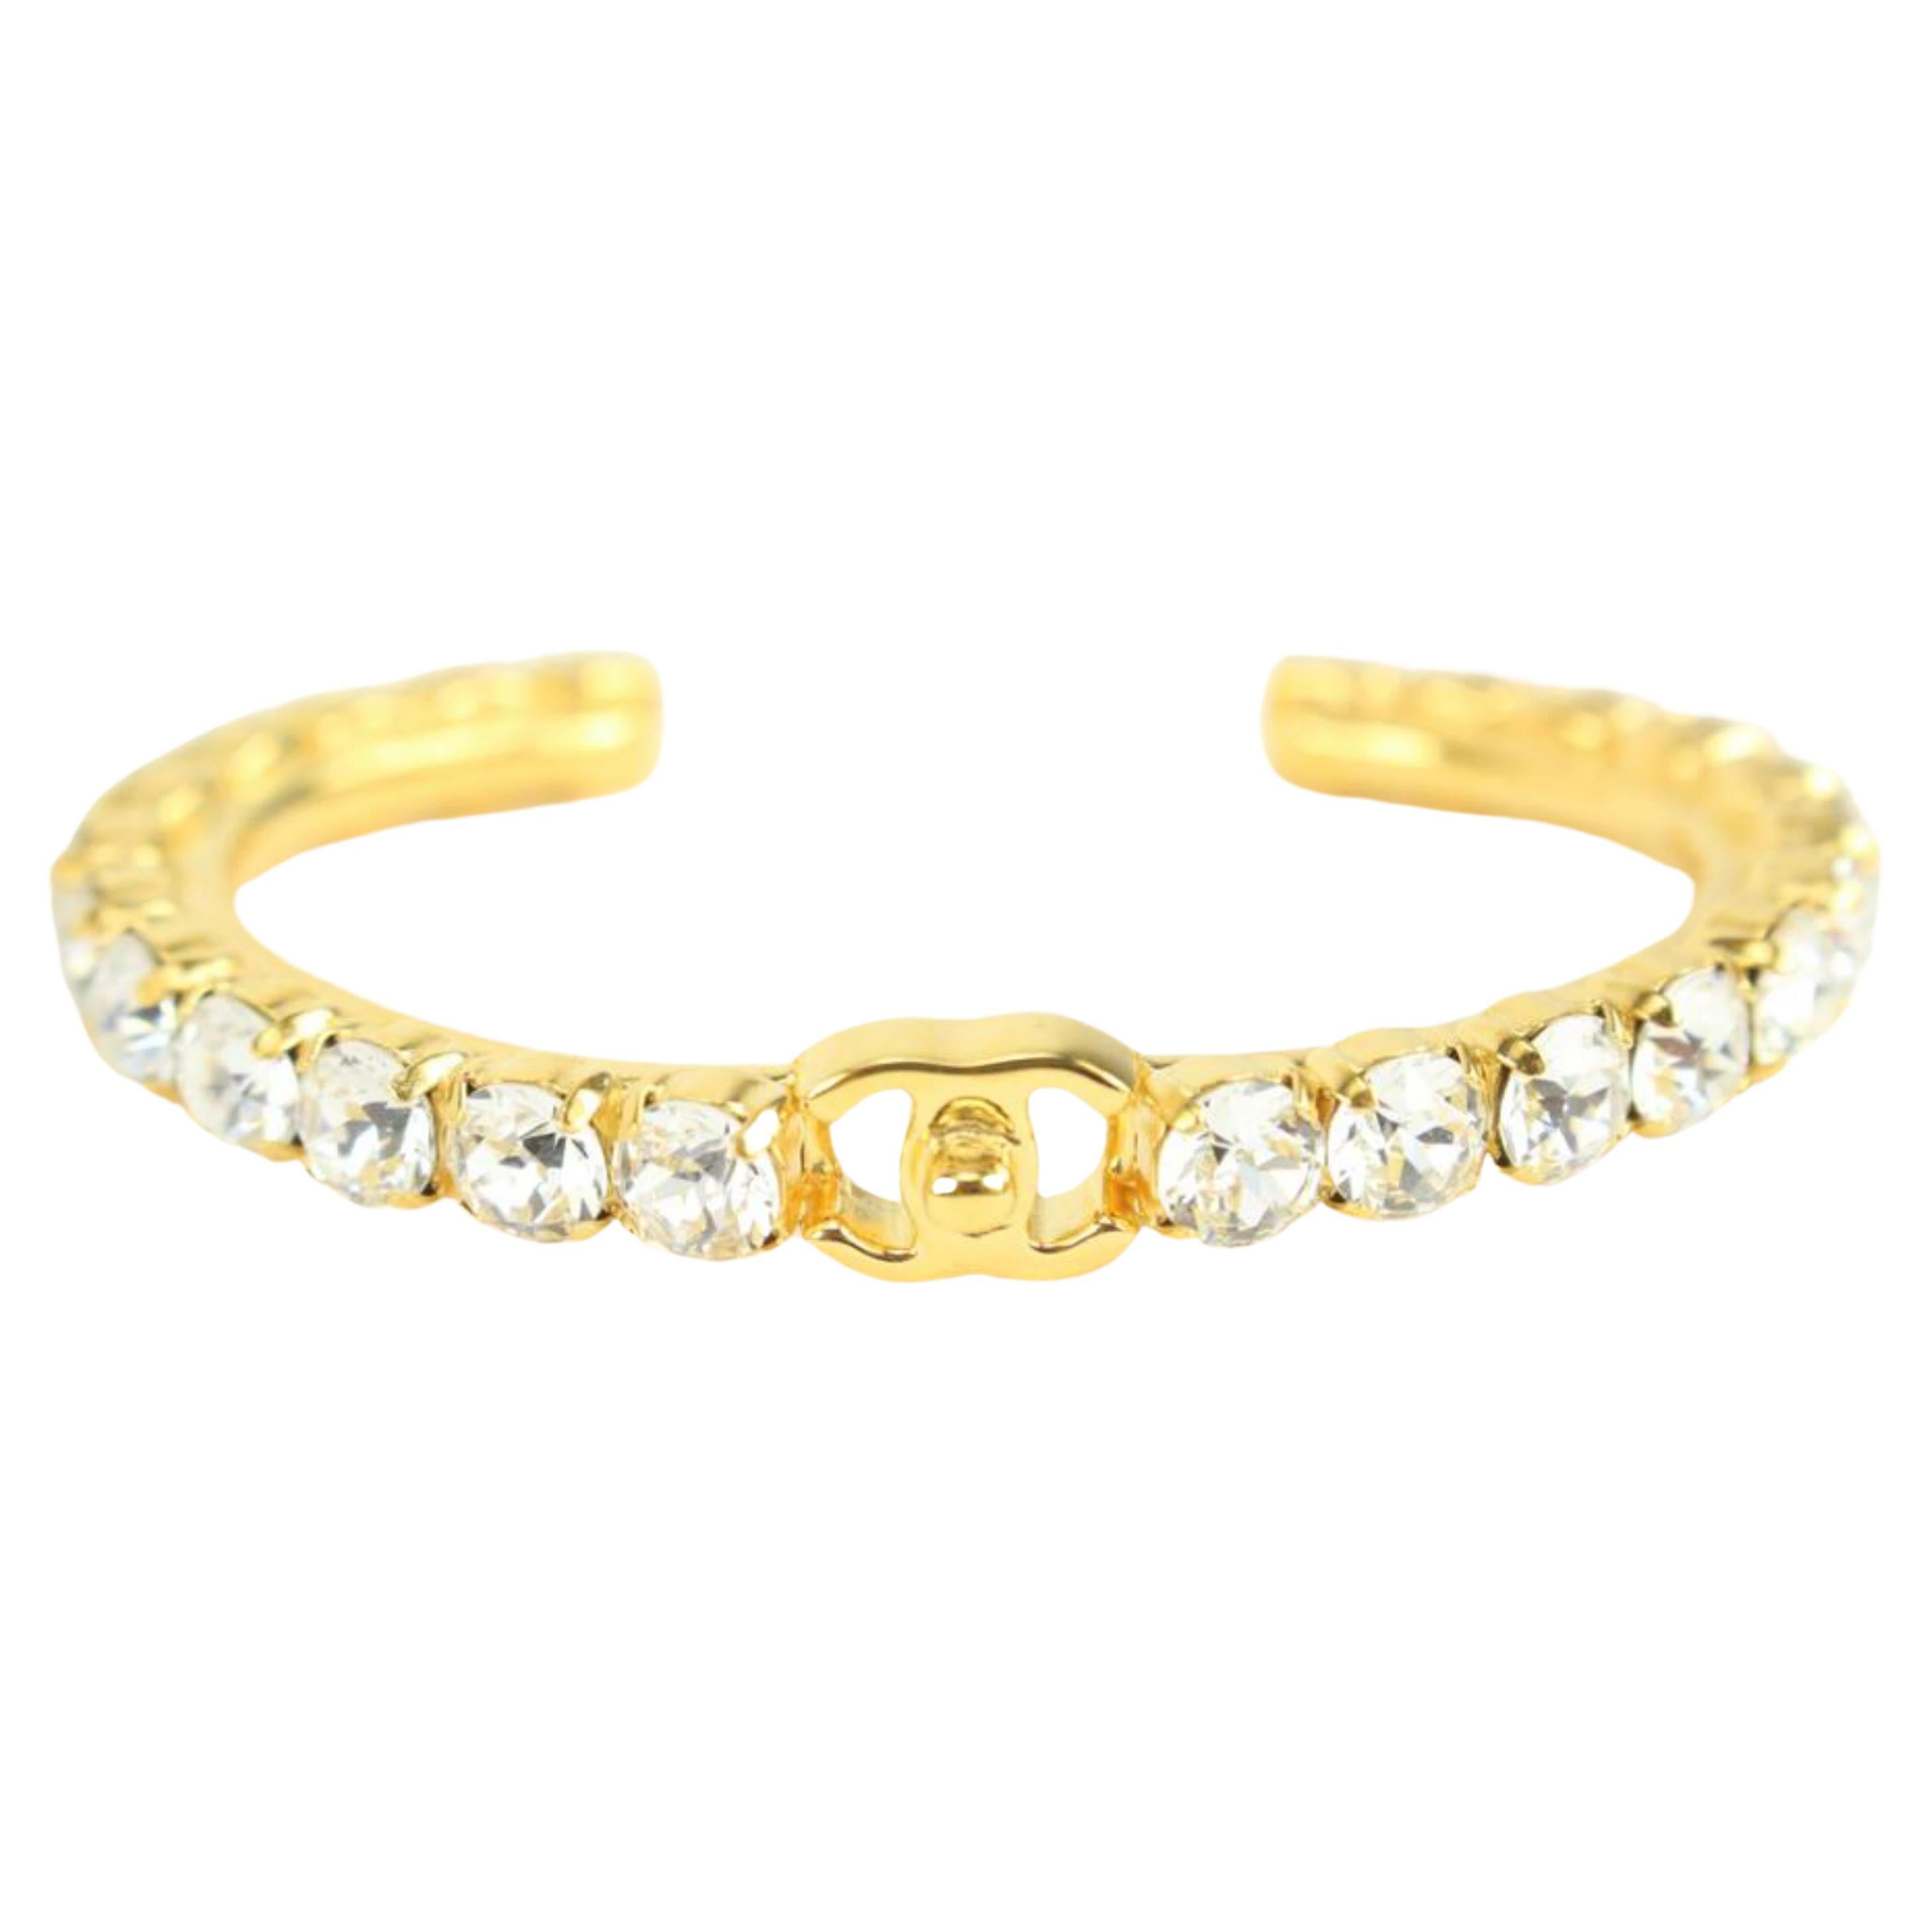 Chanel B20A Gold Crystal More is More CC Turnlock Bangle Bracelet Cuff 1118c6